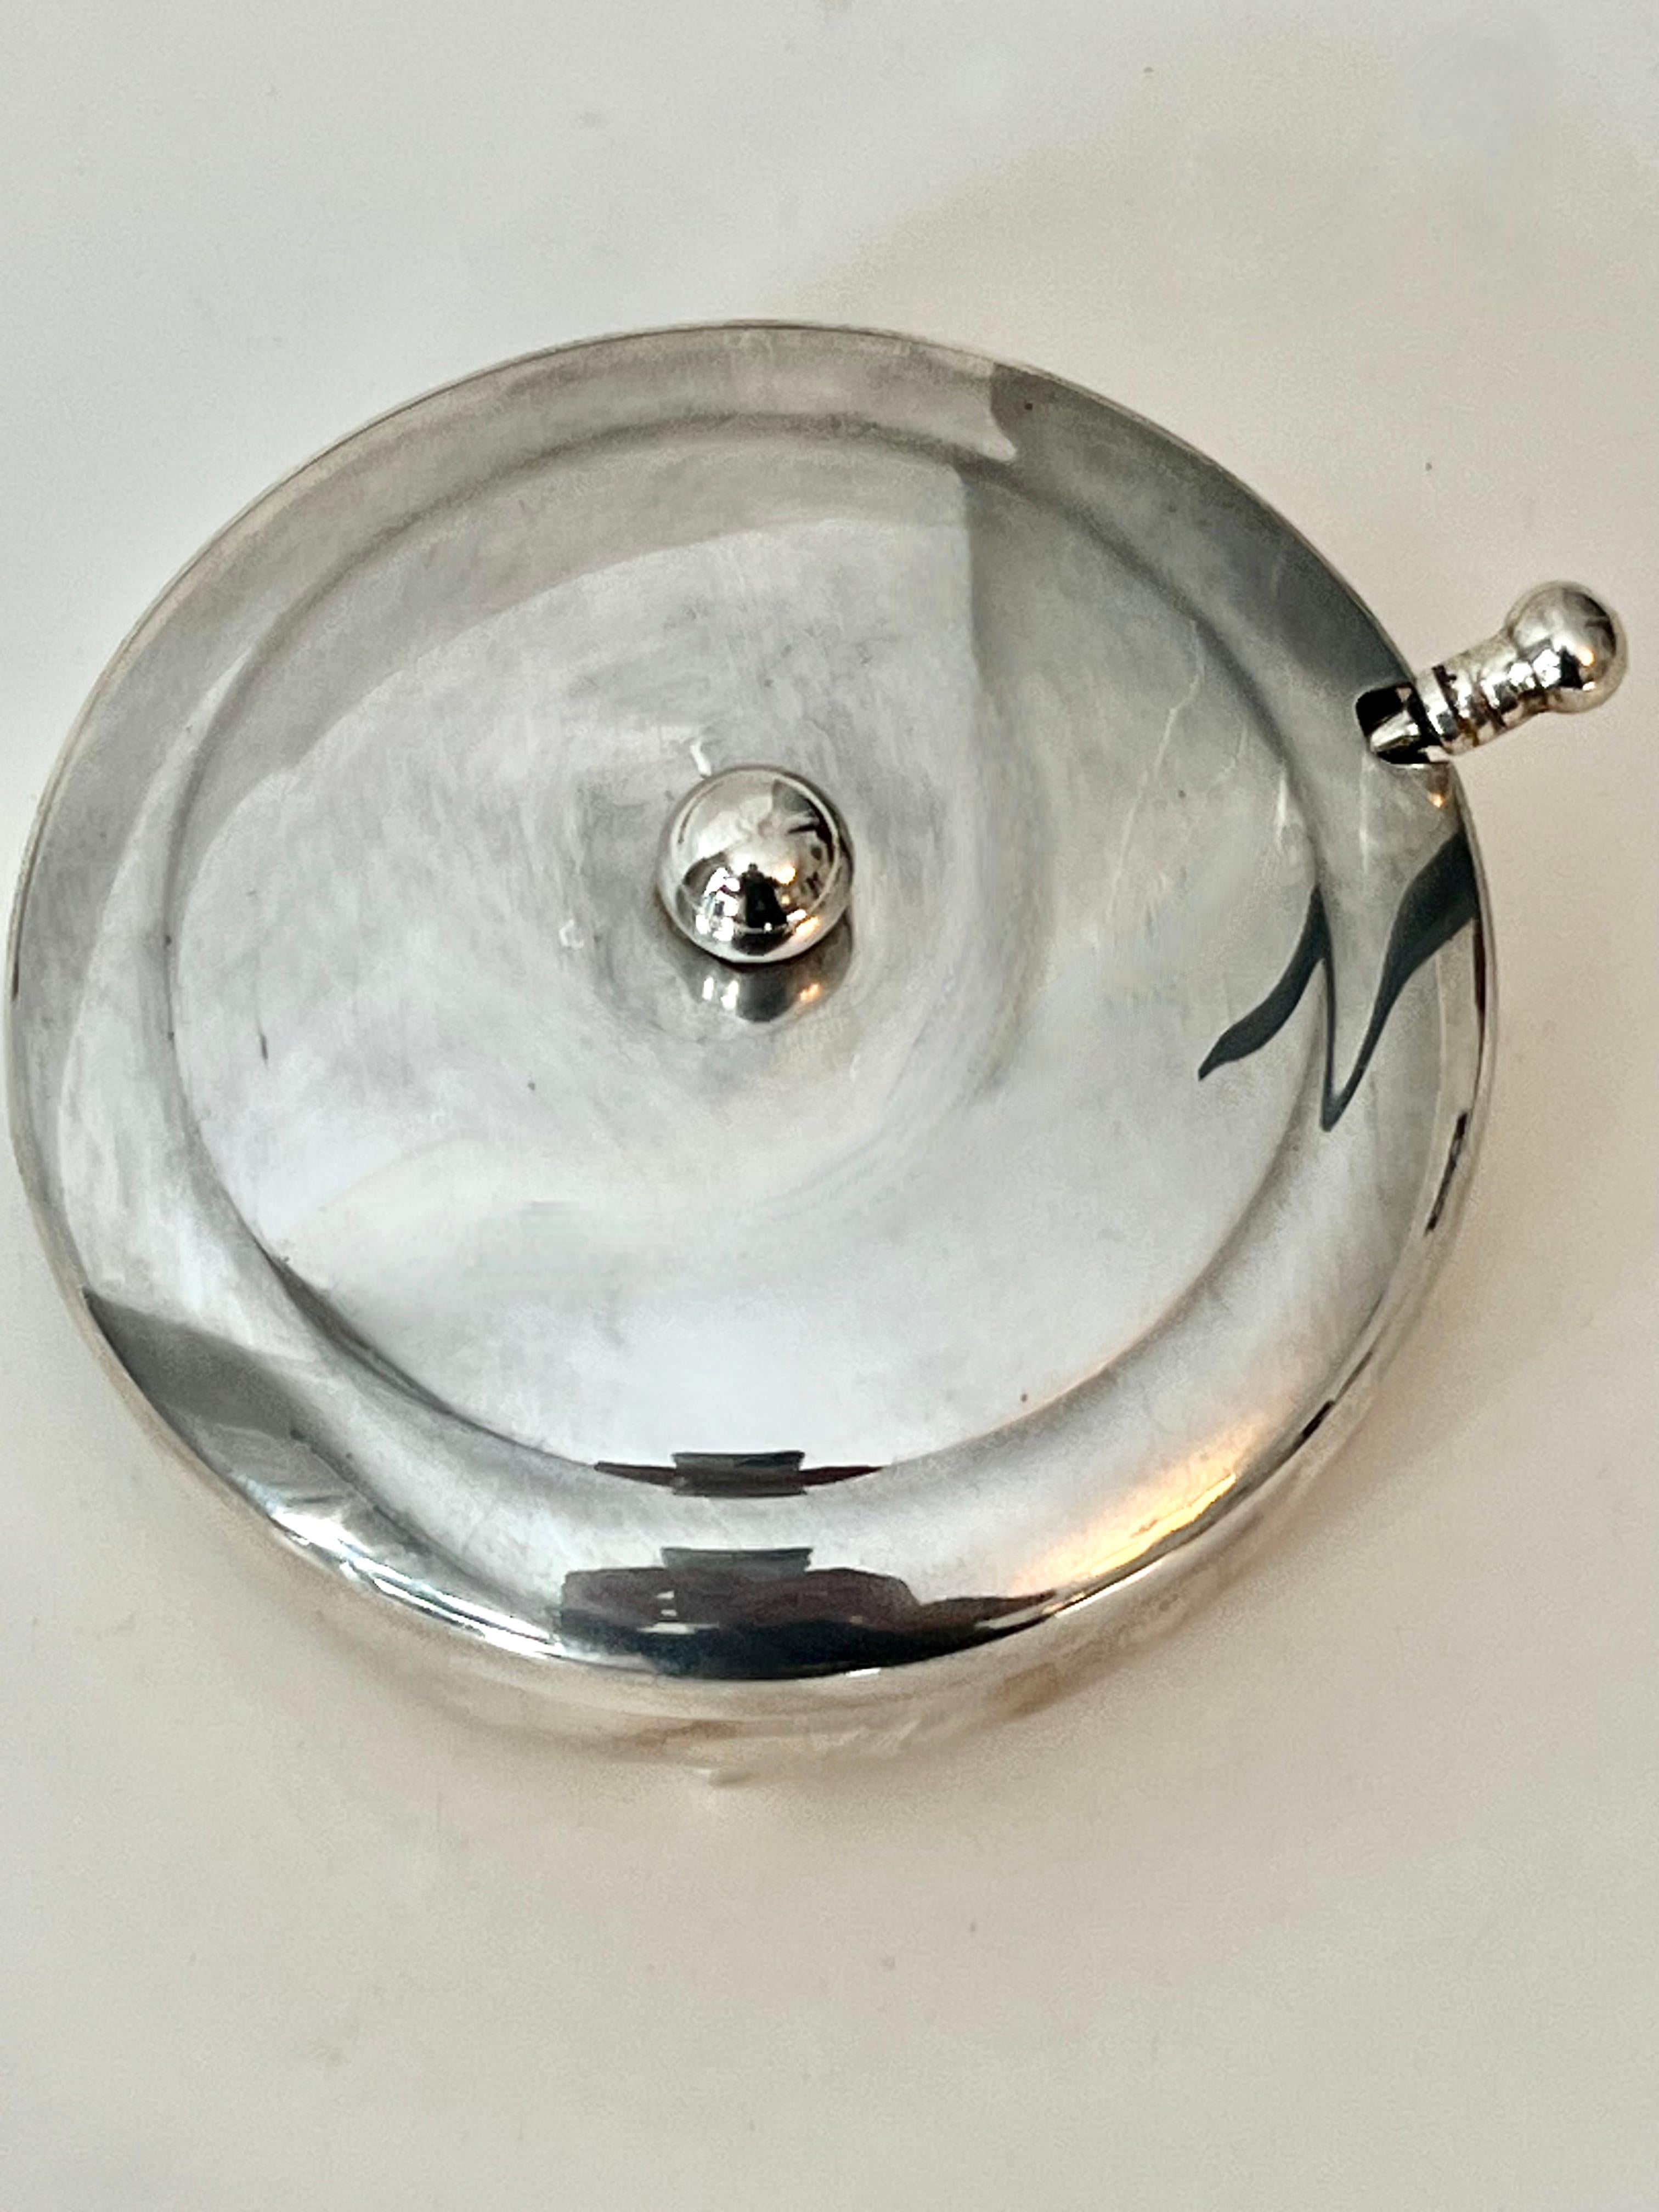 Silver Plate Silverplate Sugar or Condiment Bowl with Spoon For Sale